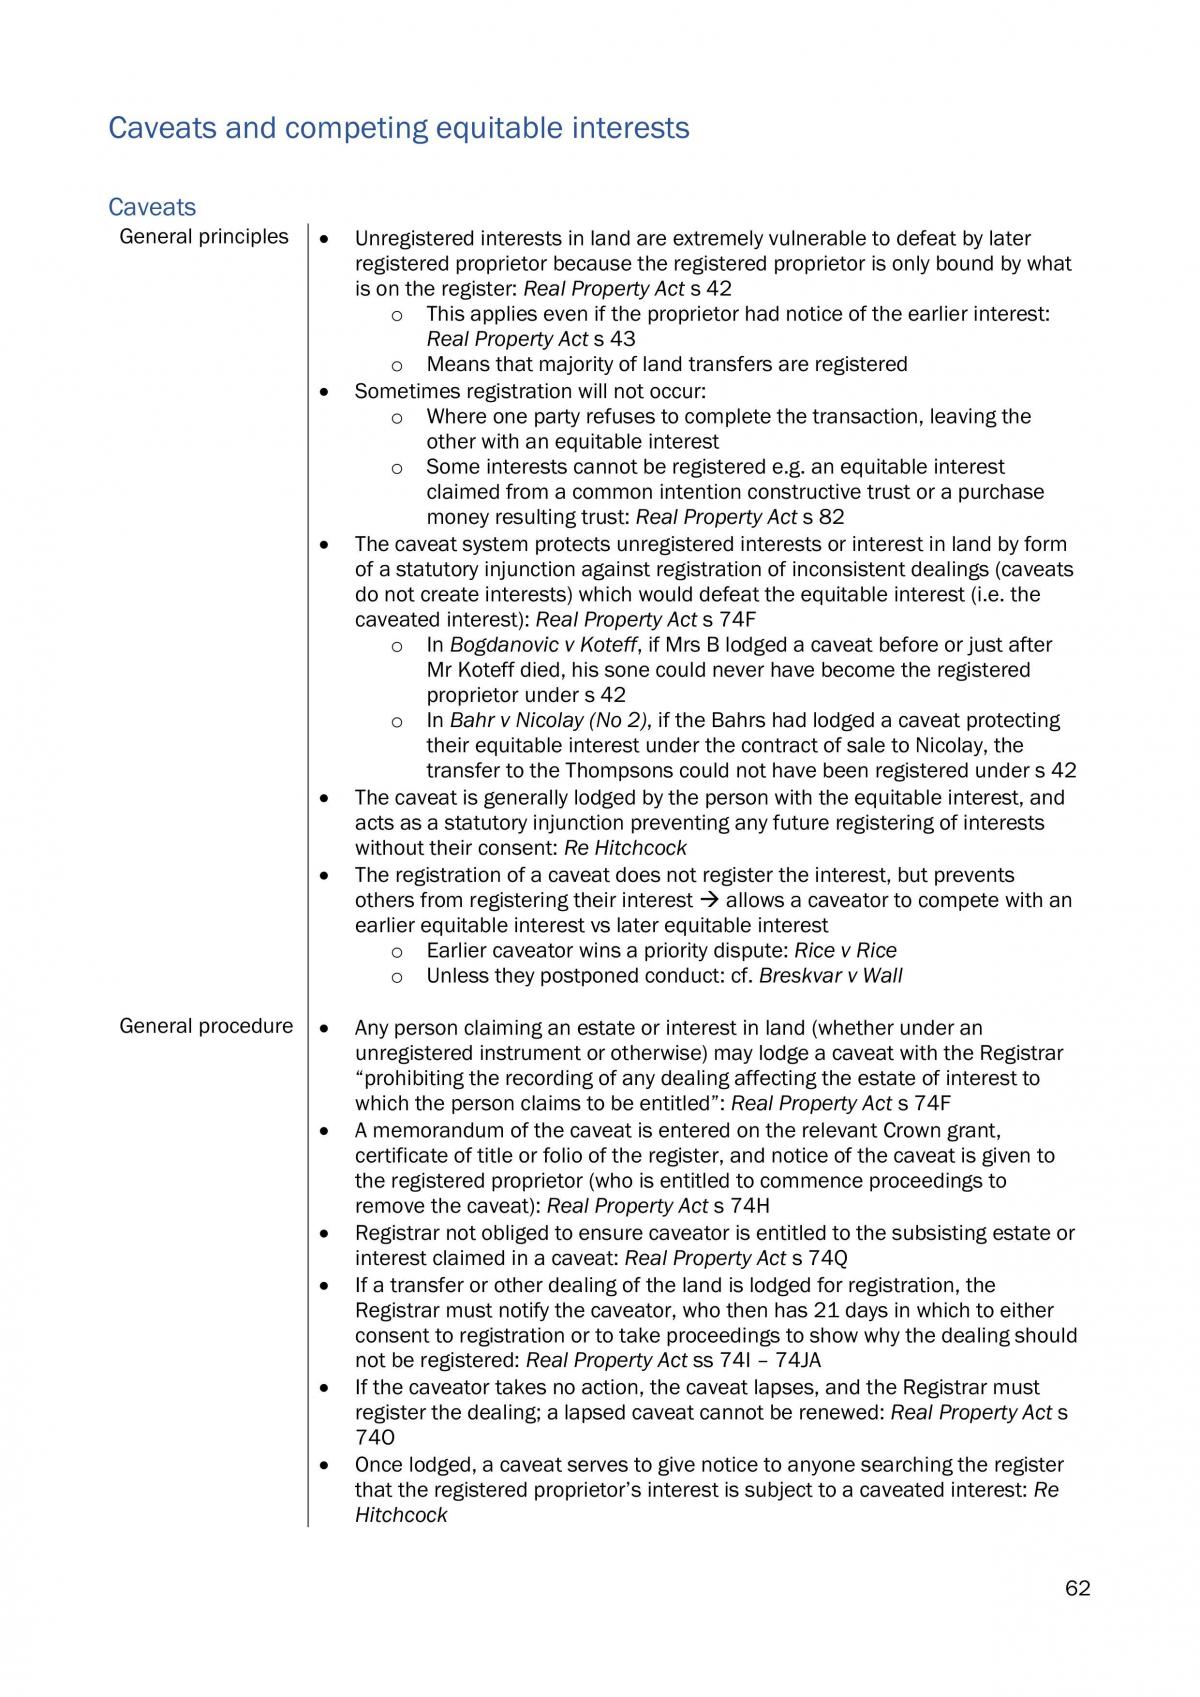 LAWS2383 Study Notes - Page 63